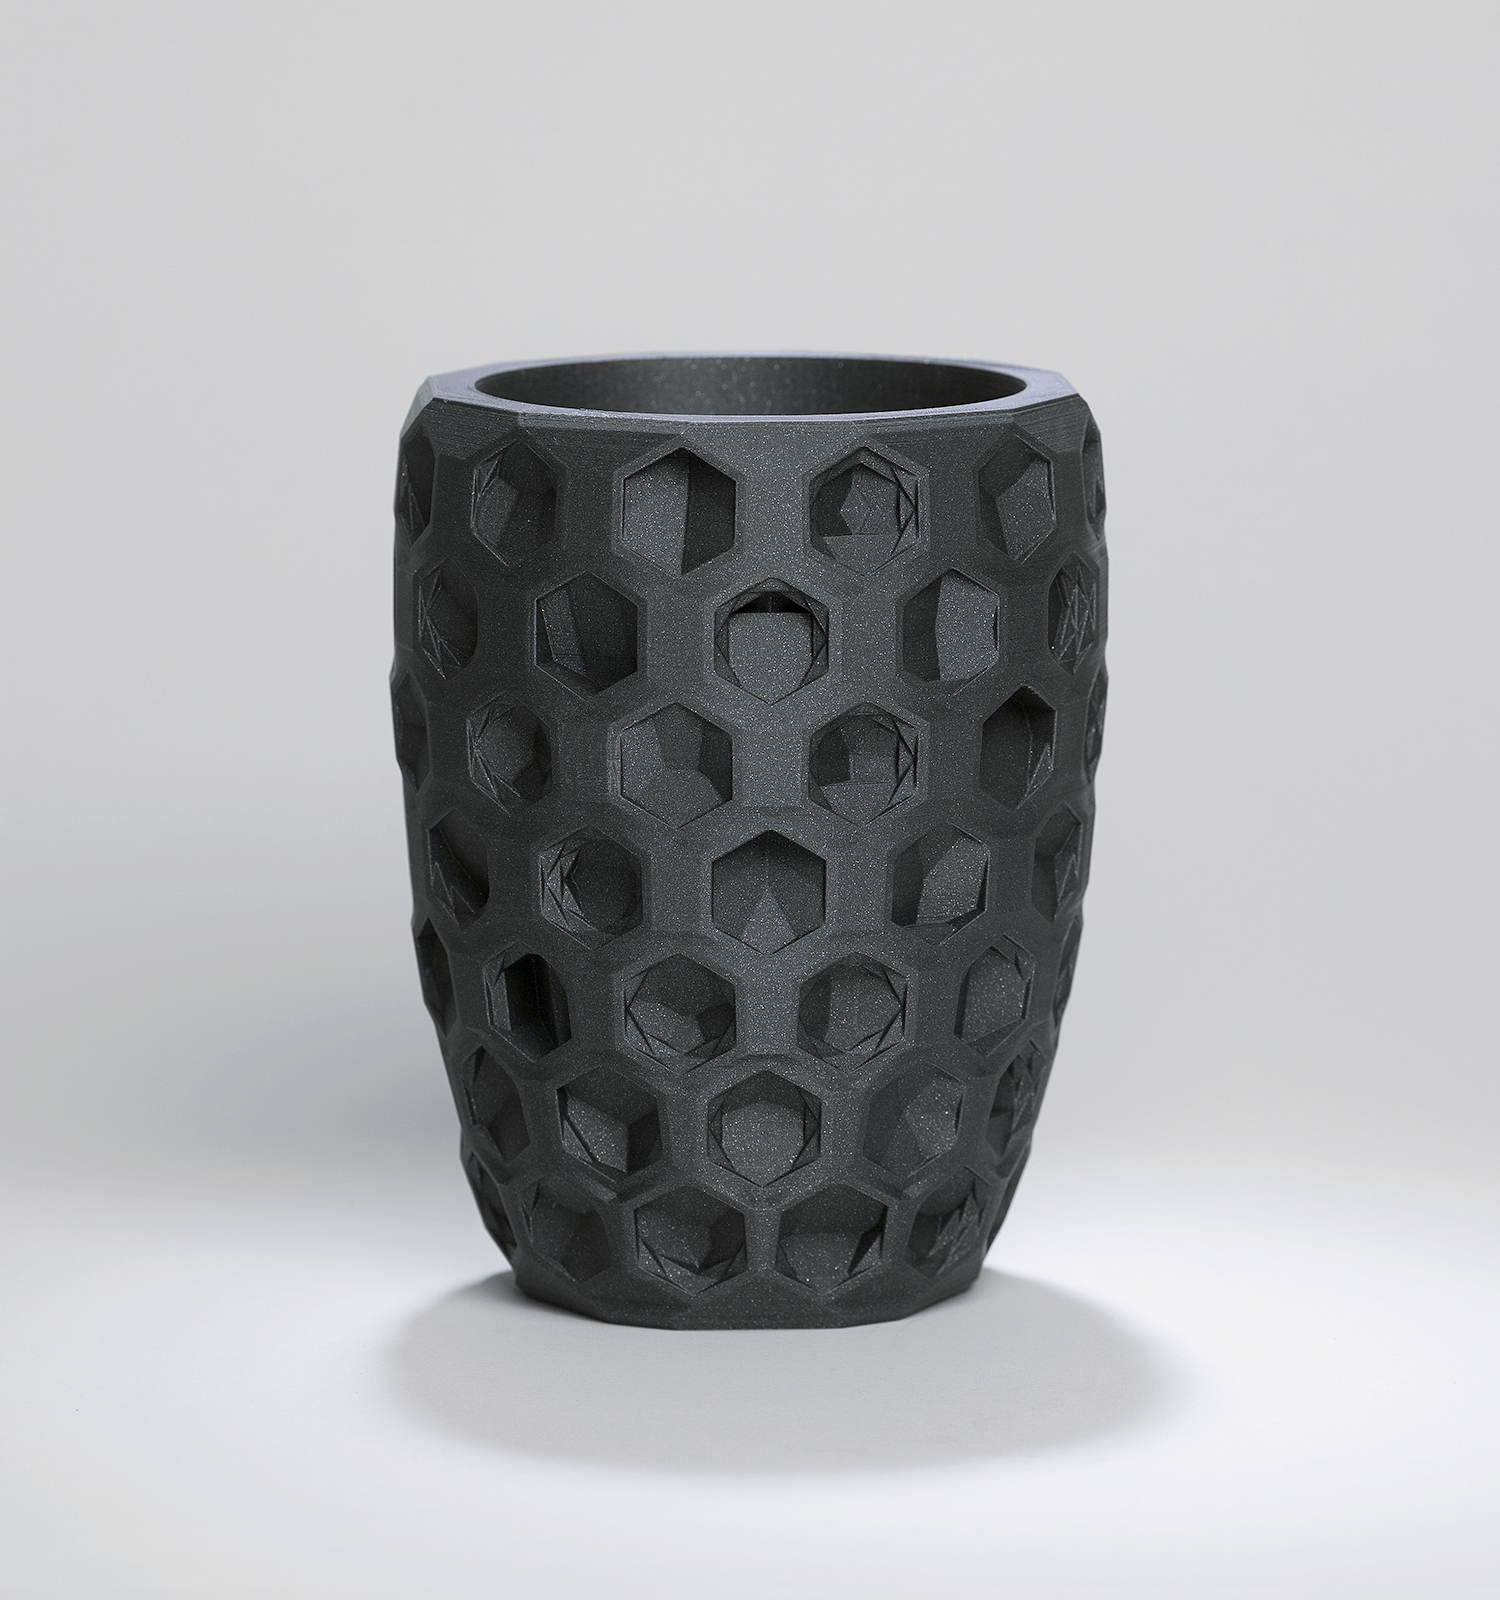 Customisable, scale-to-print urn.